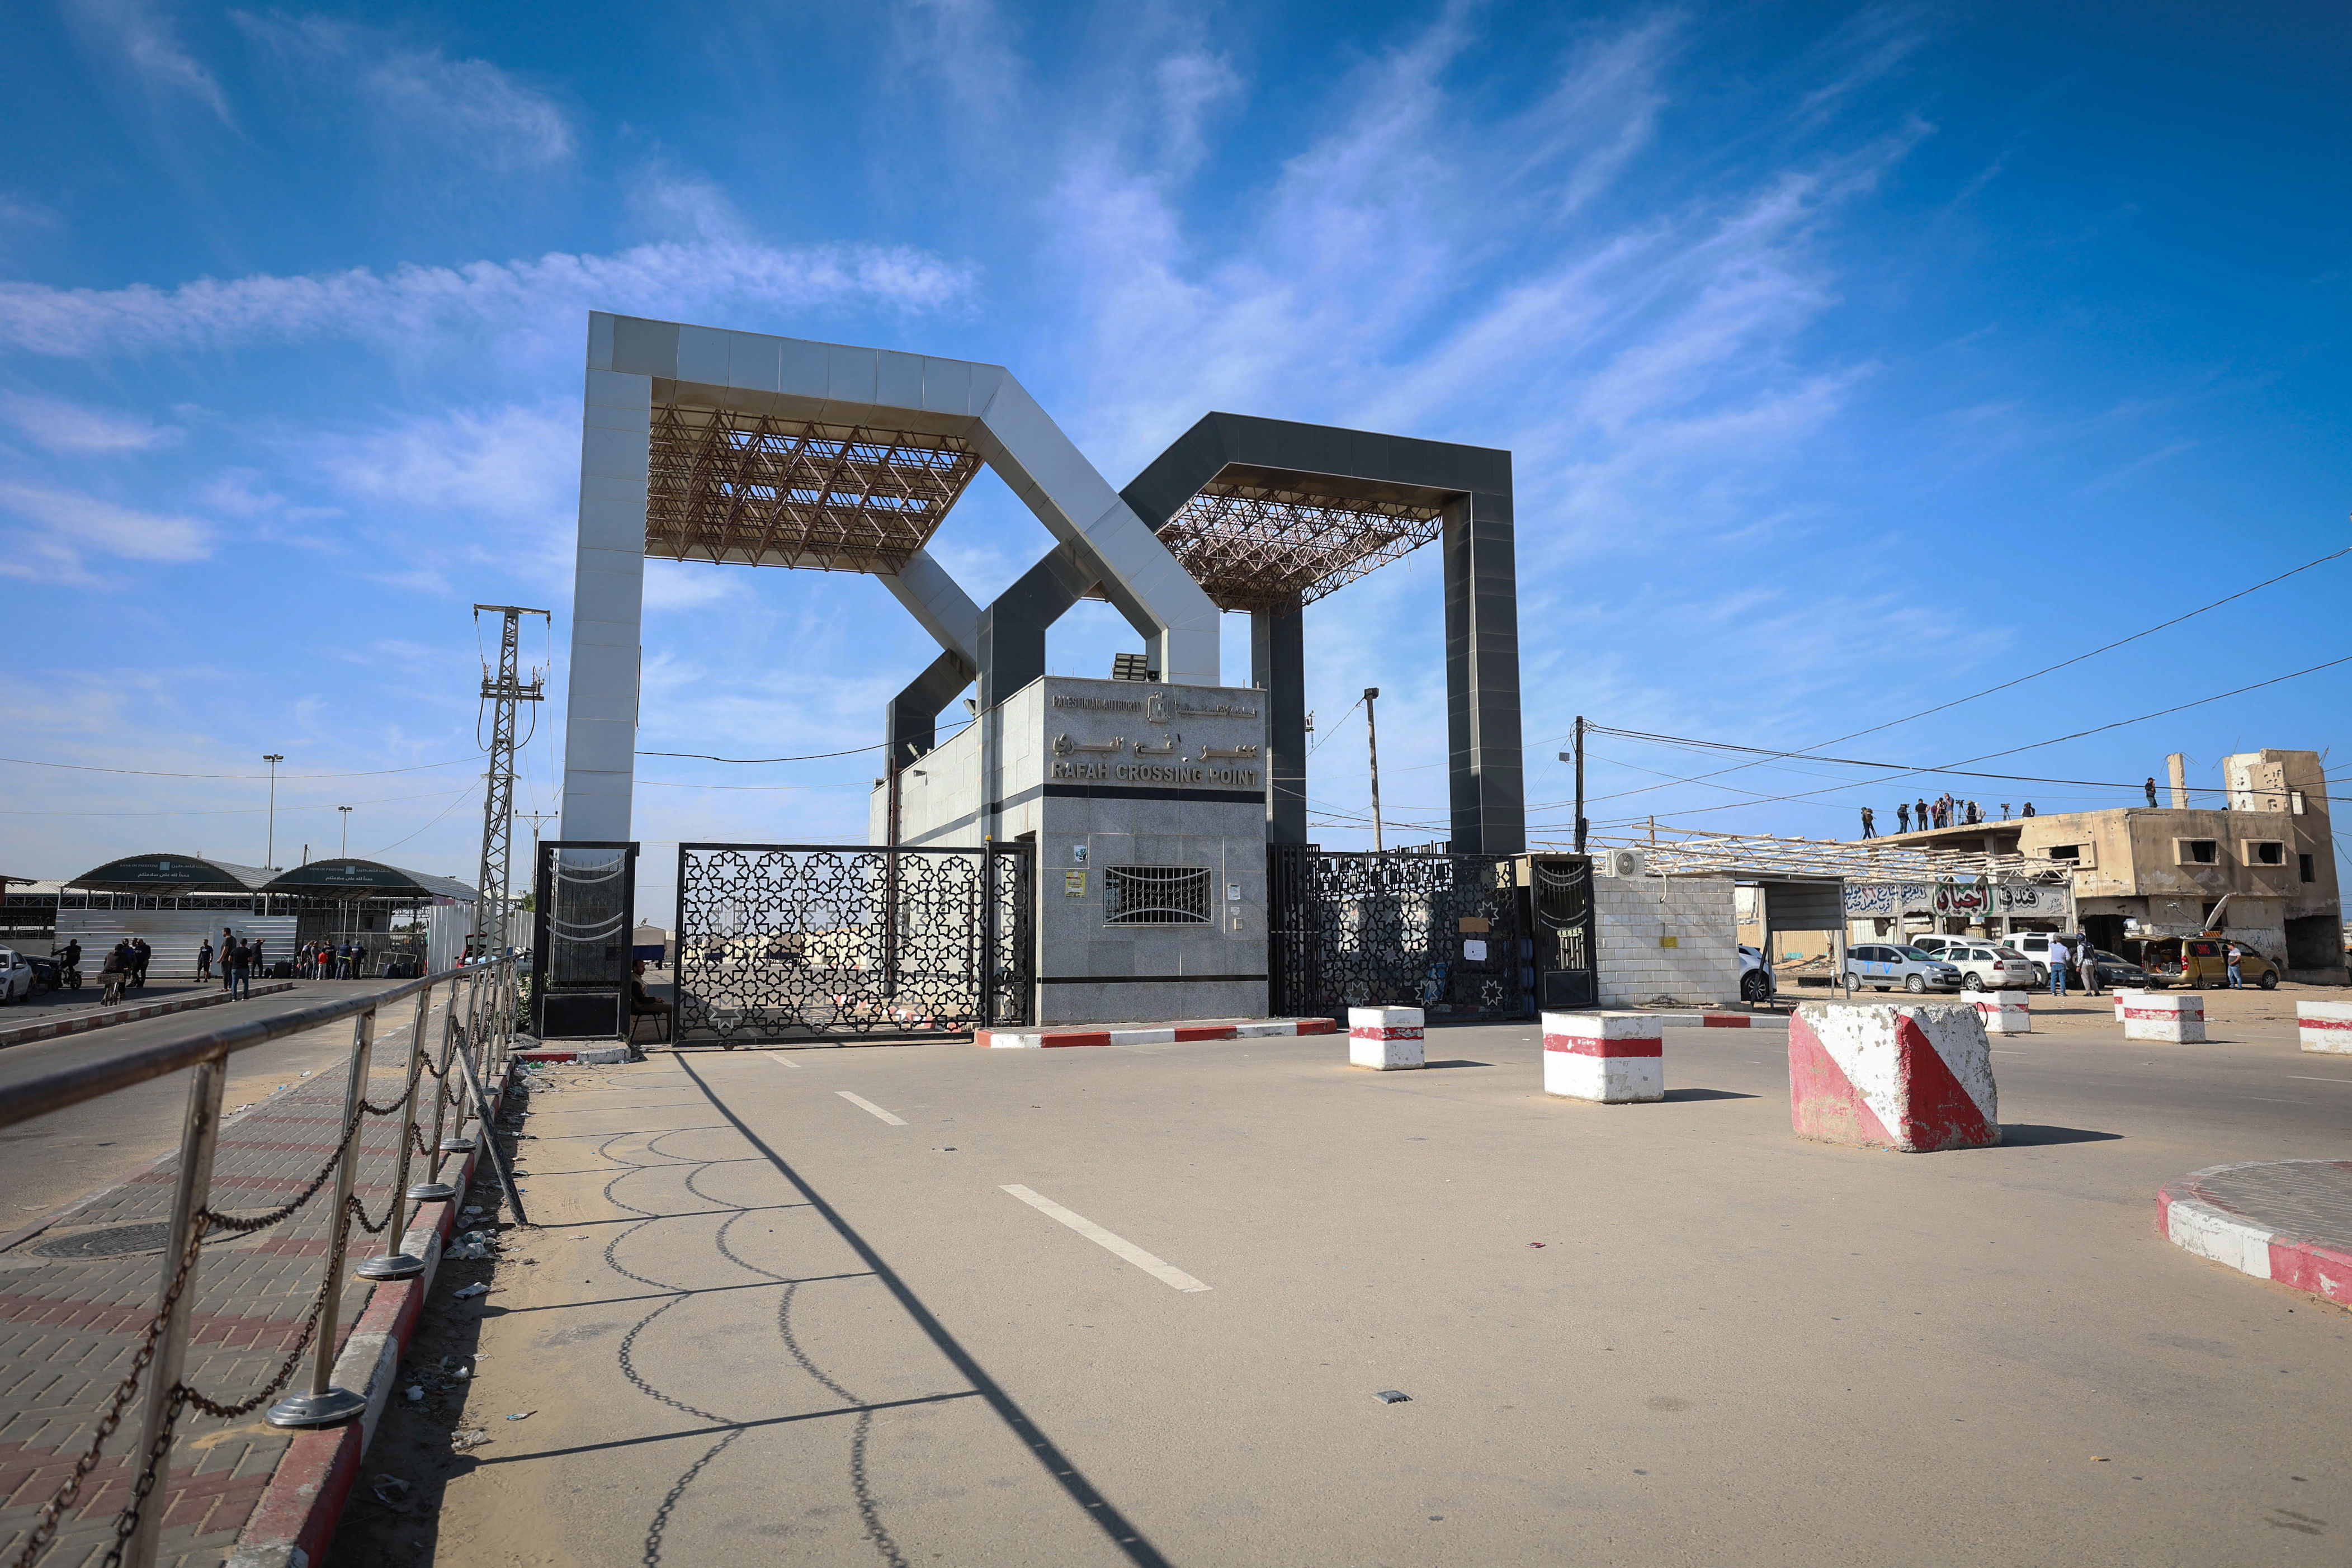 middle east conflict live updates: idf takes control of rafah border crossing; aid flow halted, official says